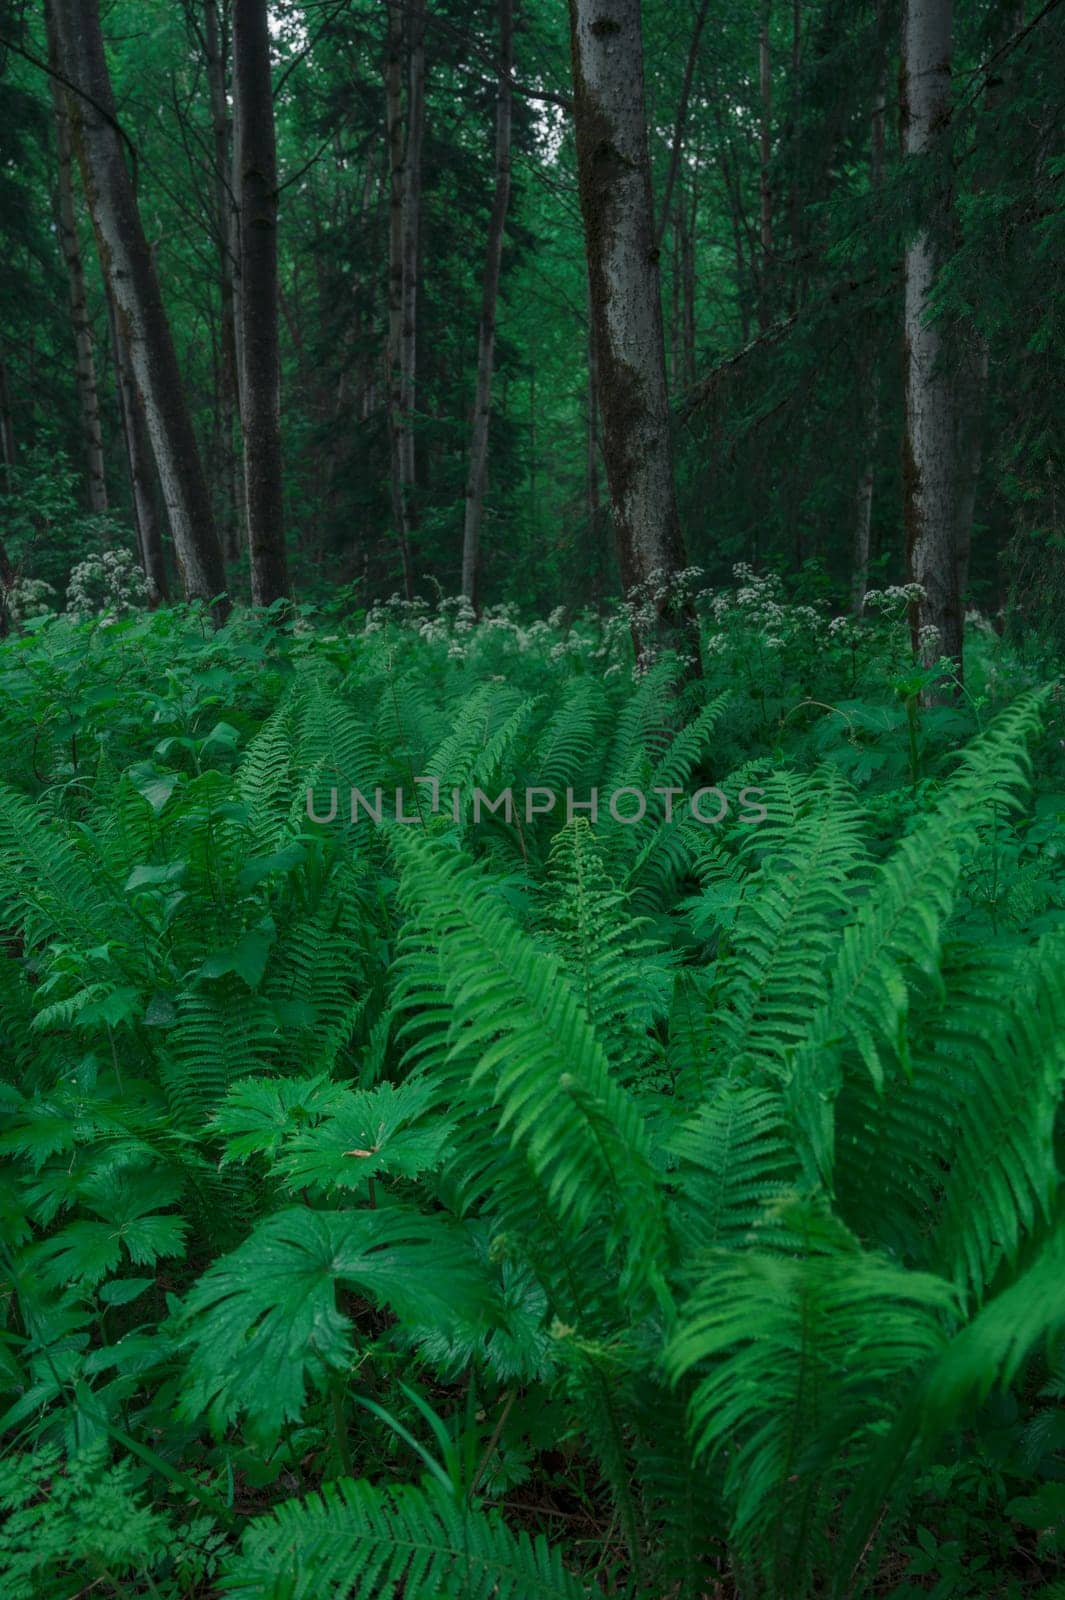 Fern leaves in the summer forest